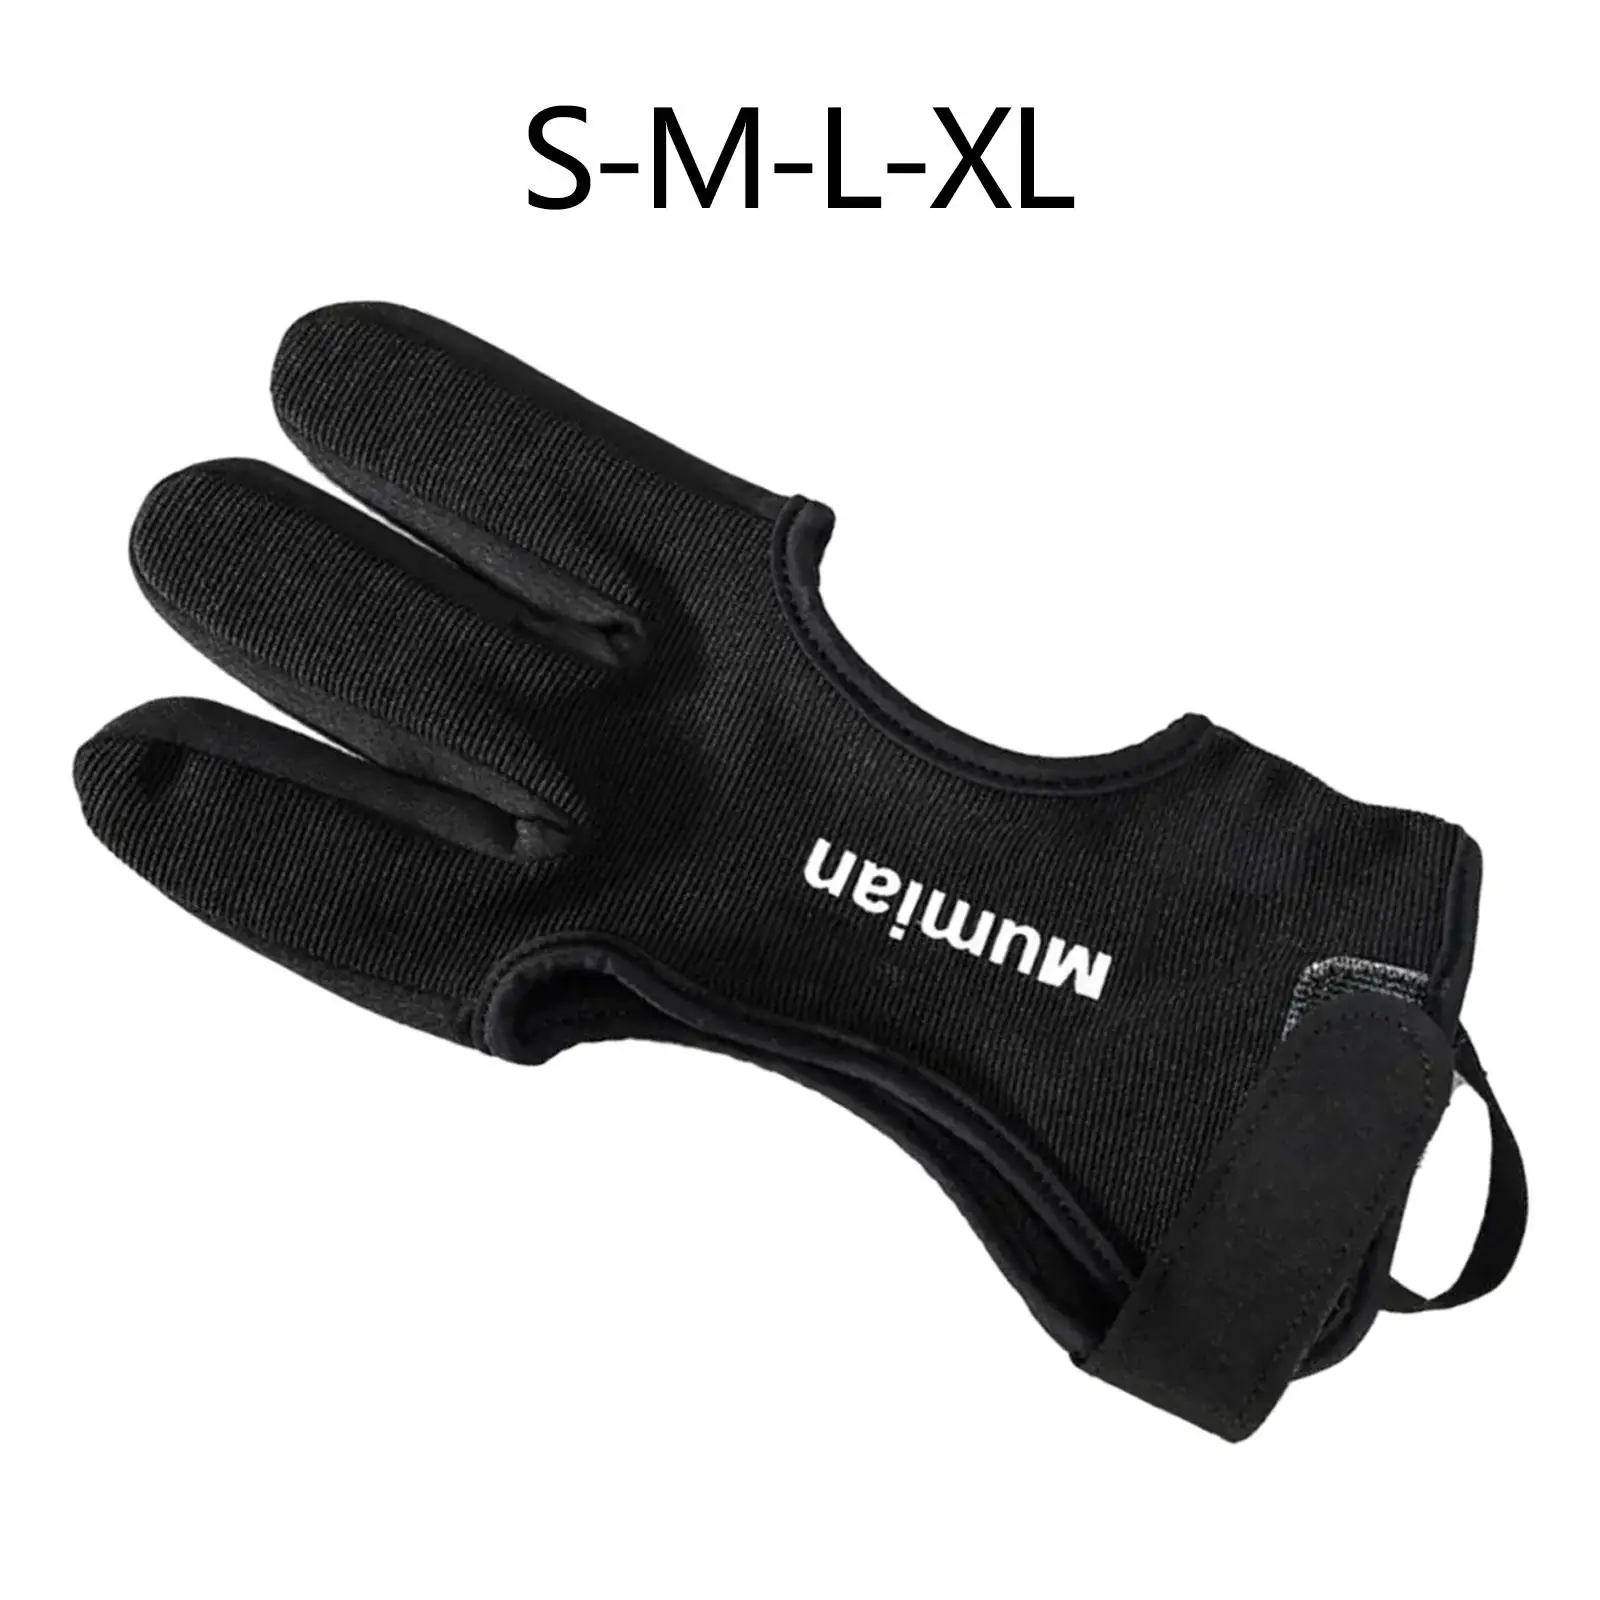 Archery Glove Breathable for Left and Right Hand Nonslip Padded Tips Archery Finger Guard for Men Women Adult Archery Practice